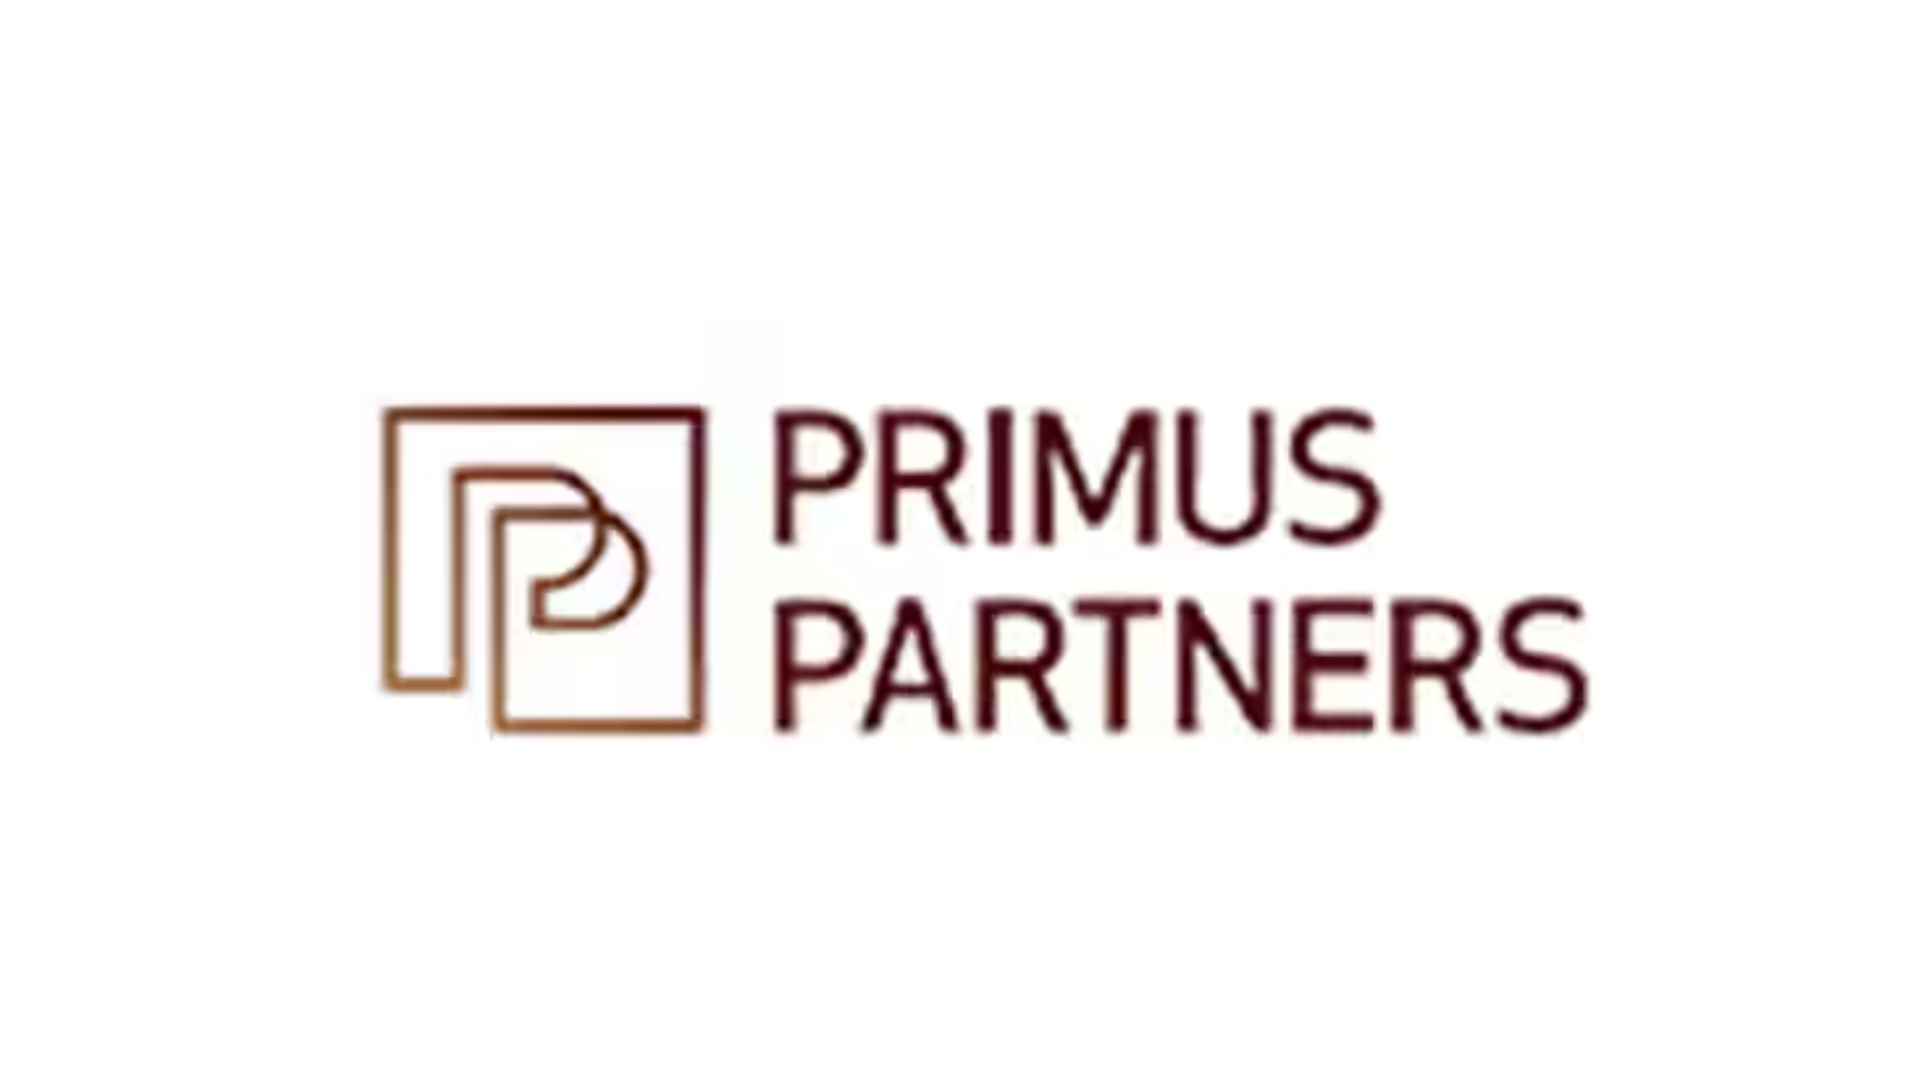 Primus Partners Unveils its First Annual Report "CHETNA" - Creating Consciousness Through Business